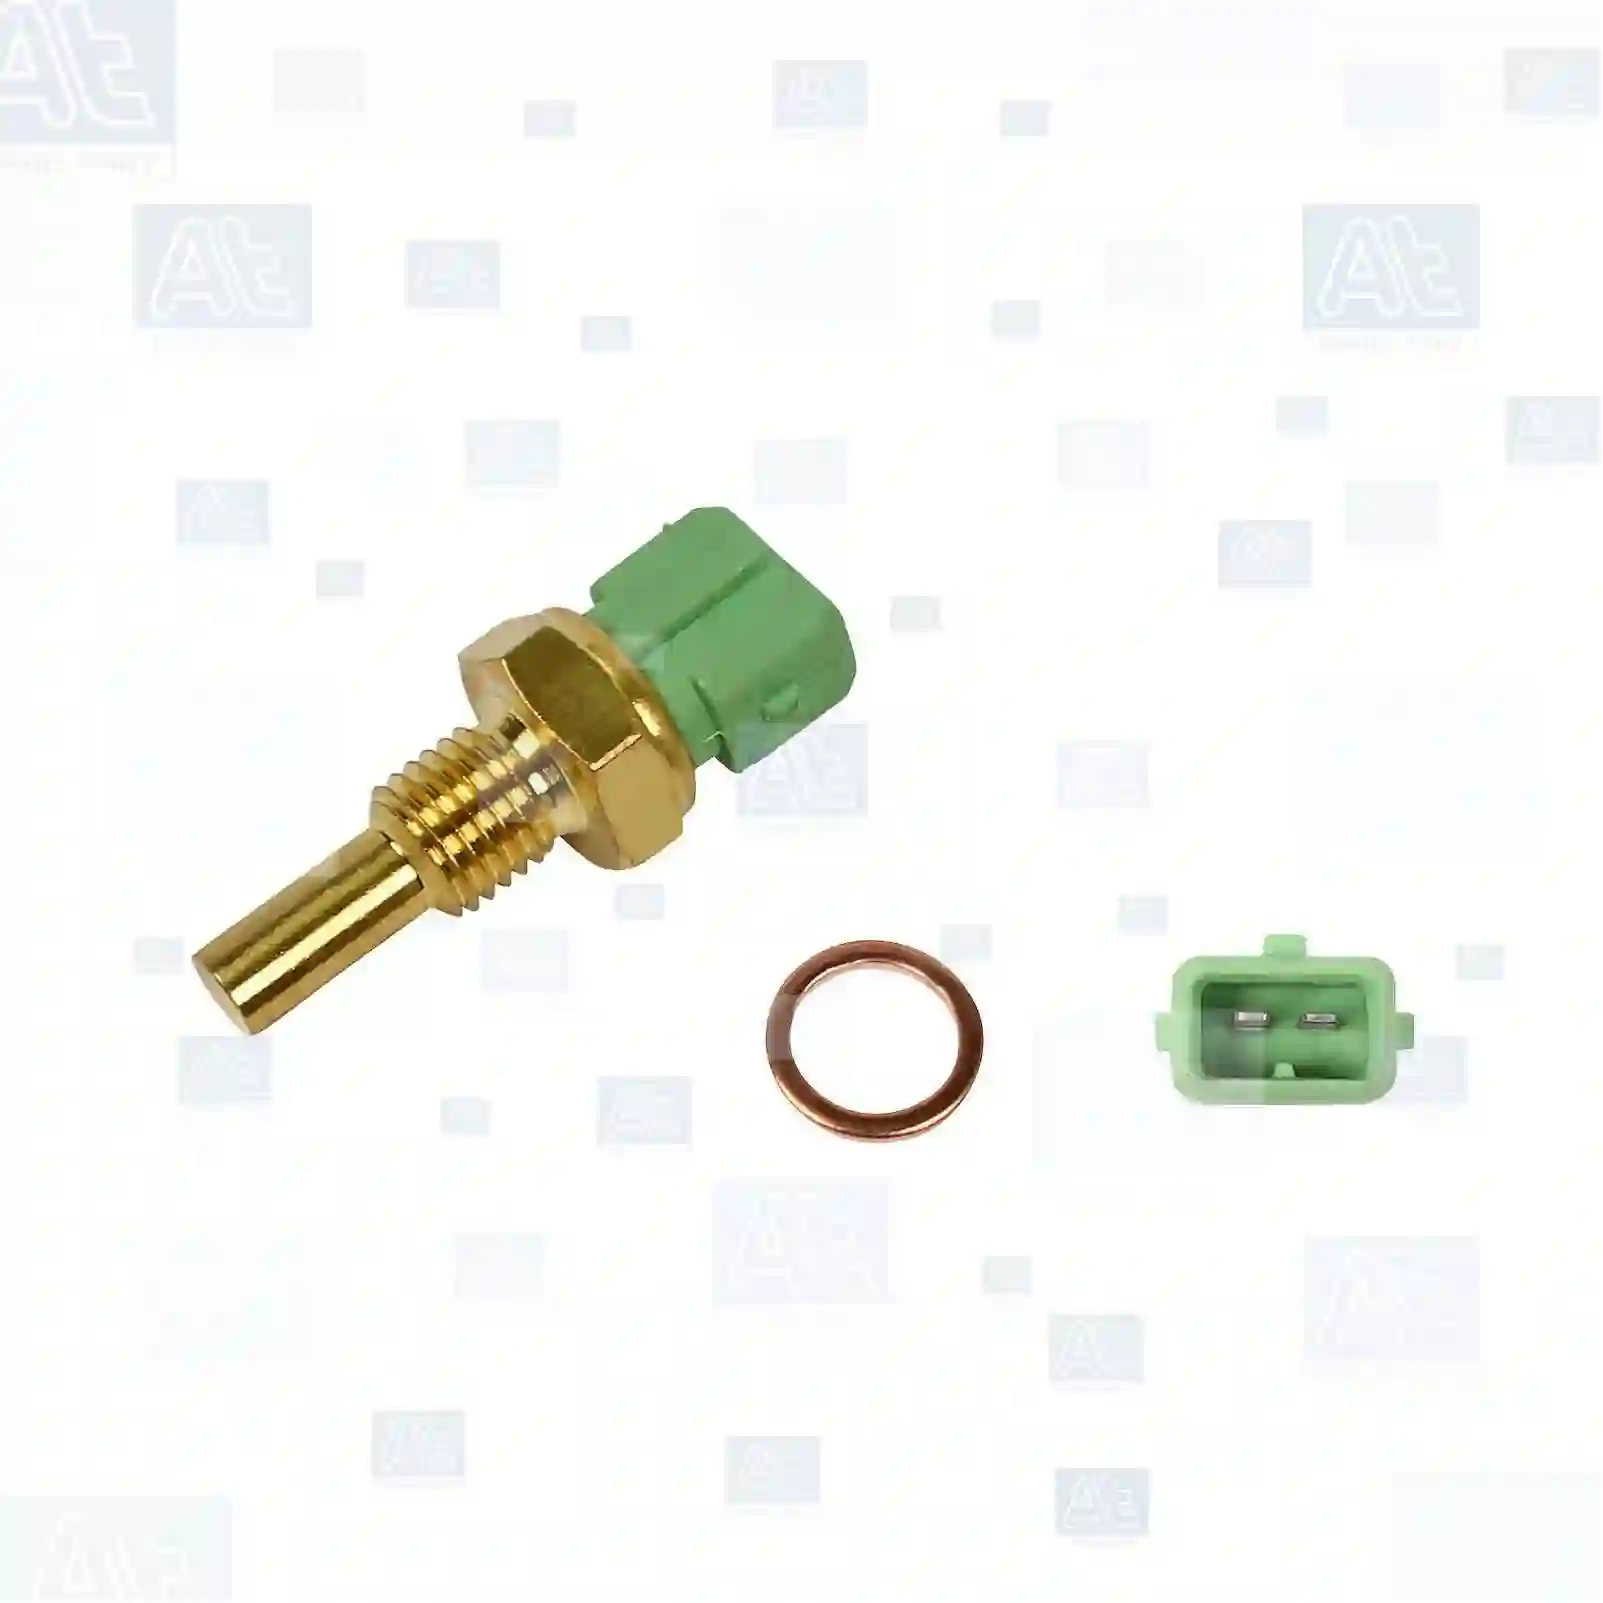 Temperature sensor, at no 77707155, oem no: 04393601, 04850371, 05972332, 07547977, 07695581, 07738223, 07770239, 09946866, 11911110100, 119111101000, 1953211010, 195321101000, 1953211010000, 46125769, 46477022, 605132050, 605233830, 60513205, 60523383, 60528383, 60800167, 60806379, 60808142, 60813751, 98424793, 820004, 004435008, 004435010, 025906041, 6U0919501, UE71610, 1284397, 1357414, 1401945, 1709966, 1709967, 13621284397, 13621357414, 13621401945, 13621709966, 13621709967, 13622242184, 90080939, 9160301, 45962029F, 00001338A5, 024246, 133857, 1338A5, 19203F, 0280130026, 39389002, 125380, 125769, 172750, 46477022, 4850371, 5972332, 60808142, 7547977, 7695581, 7770239, 98424793, 04393601, 04850371, 05972332, 06081220, 06081224, 07547977, 07695581, 07702239, 07738223, 07770239, 09946866, 30523666, 46125769, 46477022, 50009755, 5972332, 605132050, 605233830, 60513205, 60523383, 60528383, 60800167, 60806379, 60808142, 60813751, 98424793, 1207003, 1639283, 1957002, 1C1R-7H141-AA, 7072695, 94720065561, 1338444, 1338451, 1338458, 1338548, 30523666, 6238317, 90018835, 90080039, 90080939, 90410192, 90410792, 90411977, 90487859, 90510183, 9160301, 92017805, 9275979, 93184580, 93358883, 94205866, 96060084, 30506984, 30523666, 8942058660, 90410792, 90411977, 92017805, 37870-P5T-G00, 37870-PDF-E00, 37870-PDF-E01, 39220-22000, 39220-22010, 11023V0700, 2263010G00, 22630G2402, 22630G2404, 22630N4200, 46477022, 5972332, 98424793, 8-94205866-0, 04393601, 04850371, 05972332, 07738223, 46477022, 5972332, 60808142, 98424793, DAC4737, UKC2525, 45962029F, 0K737-18840, 39220-22000, 39220-22010, 39220-22020, 00125769, 04393601, 04850371, 05972332, 07547977, 07695581, 07770239, 09946866, 119111101000, 195321101000, 46125769, 46477022, 605132050, 605233830, 60513205, 60523383, 60528383, 60800167, 60806379, 60808142, 60813751, 98424793, ERR2081, 0770034, 89422-05010, 89422-05020, 470079800, AW311467, 29729460, 11023-G7000, 11023-V0700, 22630-10G00, 22630-G2402, 22630-G2404, 22630-N4200, 22630-P8100, 1338443, 1338444, 1338451, 1338458, 1338541, 1342850, 1738451, 4416020, 4500001, 6238317, 8933631, 8983631, 00001338A5, 024246, 133857, 1338A5, 19203F, 92860612501, 94460612500, 9966062239A, 0770287460, 5001865578, 7700267388, 7700582688, 7702087460, UE71610, ERR2081, GTR204, 4503132, 4770228, 756356, 7563562, 90510183, 91514549, 935702, 9357021, 004435008, 004435010, 025906041, 6U0919501, 004435008, 004435010, 025906041, 6U0919501, 55450, 55506, 22630AA000, 13650-60B00, 13650-60B00-000, 13650-84101, 13650-84101-000, 9141454980, 9151454980, A51454980, 89422-05010, 89422-05020, 1306937, 13069370, 1332396, 13323960, 13323969, 004435008, 004435010, 025906041, 026906161, 6U0919501 At Spare Part | Engine, Accelerator Pedal, Camshaft, Connecting Rod, Crankcase, Crankshaft, Cylinder Head, Engine Suspension Mountings, Exhaust Manifold, Exhaust Gas Recirculation, Filter Kits, Flywheel Housing, General Overhaul Kits, Engine, Intake Manifold, Oil Cleaner, Oil Cooler, Oil Filter, Oil Pump, Oil Sump, Piston & Liner, Sensor & Switch, Timing Case, Turbocharger, Cooling System, Belt Tensioner, Coolant Filter, Coolant Pipe, Corrosion Prevention Agent, Drive, Expansion Tank, Fan, Intercooler, Monitors & Gauges, Radiator, Thermostat, V-Belt / Timing belt, Water Pump, Fuel System, Electronical Injector Unit, Feed Pump, Fuel Filter, cpl., Fuel Gauge Sender,  Fuel Line, Fuel Pump, Fuel Tank, Injection Line Kit, Injection Pump, Exhaust System, Clutch & Pedal, Gearbox, Propeller Shaft, Axles, Brake System, Hubs & Wheels, Suspension, Leaf Spring, Universal Parts / Accessories, Steering, Electrical System, Cabin Temperature sensor, at no 77707155, oem no: 04393601, 04850371, 05972332, 07547977, 07695581, 07738223, 07770239, 09946866, 11911110100, 119111101000, 1953211010, 195321101000, 1953211010000, 46125769, 46477022, 605132050, 605233830, 60513205, 60523383, 60528383, 60800167, 60806379, 60808142, 60813751, 98424793, 820004, 004435008, 004435010, 025906041, 6U0919501, UE71610, 1284397, 1357414, 1401945, 1709966, 1709967, 13621284397, 13621357414, 13621401945, 13621709966, 13621709967, 13622242184, 90080939, 9160301, 45962029F, 00001338A5, 024246, 133857, 1338A5, 19203F, 0280130026, 39389002, 125380, 125769, 172750, 46477022, 4850371, 5972332, 60808142, 7547977, 7695581, 7770239, 98424793, 04393601, 04850371, 05972332, 06081220, 06081224, 07547977, 07695581, 07702239, 07738223, 07770239, 09946866, 30523666, 46125769, 46477022, 50009755, 5972332, 605132050, 605233830, 60513205, 60523383, 60528383, 60800167, 60806379, 60808142, 60813751, 98424793, 1207003, 1639283, 1957002, 1C1R-7H141-AA, 7072695, 94720065561, 1338444, 1338451, 1338458, 1338548, 30523666, 6238317, 90018835, 90080039, 90080939, 90410192, 90410792, 90411977, 90487859, 90510183, 9160301, 92017805, 9275979, 93184580, 93358883, 94205866, 96060084, 30506984, 30523666, 8942058660, 90410792, 90411977, 92017805, 37870-P5T-G00, 37870-PDF-E00, 37870-PDF-E01, 39220-22000, 39220-22010, 11023V0700, 2263010G00, 22630G2402, 22630G2404, 22630N4200, 46477022, 5972332, 98424793, 8-94205866-0, 04393601, 04850371, 05972332, 07738223, 46477022, 5972332, 60808142, 98424793, DAC4737, UKC2525, 45962029F, 0K737-18840, 39220-22000, 39220-22010, 39220-22020, 00125769, 04393601, 04850371, 05972332, 07547977, 07695581, 07770239, 09946866, 119111101000, 195321101000, 46125769, 46477022, 605132050, 605233830, 60513205, 60523383, 60528383, 60800167, 60806379, 60808142, 60813751, 98424793, ERR2081, 0770034, 89422-05010, 89422-05020, 470079800, AW311467, 29729460, 11023-G7000, 11023-V0700, 22630-10G00, 22630-G2402, 22630-G2404, 22630-N4200, 22630-P8100, 1338443, 1338444, 1338451, 1338458, 1338541, 1342850, 1738451, 4416020, 4500001, 6238317, 8933631, 8983631, 00001338A5, 024246, 133857, 1338A5, 19203F, 92860612501, 94460612500, 9966062239A, 0770287460, 5001865578, 7700267388, 7700582688, 7702087460, UE71610, ERR2081, GTR204, 4503132, 4770228, 756356, 7563562, 90510183, 91514549, 935702, 9357021, 004435008, 004435010, 025906041, 6U0919501, 004435008, 004435010, 025906041, 6U0919501, 55450, 55506, 22630AA000, 13650-60B00, 13650-60B00-000, 13650-84101, 13650-84101-000, 9141454980, 9151454980, A51454980, 89422-05010, 89422-05020, 1306937, 13069370, 1332396, 13323960, 13323969, 004435008, 004435010, 025906041, 026906161, 6U0919501 At Spare Part | Engine, Accelerator Pedal, Camshaft, Connecting Rod, Crankcase, Crankshaft, Cylinder Head, Engine Suspension Mountings, Exhaust Manifold, Exhaust Gas Recirculation, Filter Kits, Flywheel Housing, General Overhaul Kits, Engine, Intake Manifold, Oil Cleaner, Oil Cooler, Oil Filter, Oil Pump, Oil Sump, Piston & Liner, Sensor & Switch, Timing Case, Turbocharger, Cooling System, Belt Tensioner, Coolant Filter, Coolant Pipe, Corrosion Prevention Agent, Drive, Expansion Tank, Fan, Intercooler, Monitors & Gauges, Radiator, Thermostat, V-Belt / Timing belt, Water Pump, Fuel System, Electronical Injector Unit, Feed Pump, Fuel Filter, cpl., Fuel Gauge Sender,  Fuel Line, Fuel Pump, Fuel Tank, Injection Line Kit, Injection Pump, Exhaust System, Clutch & Pedal, Gearbox, Propeller Shaft, Axles, Brake System, Hubs & Wheels, Suspension, Leaf Spring, Universal Parts / Accessories, Steering, Electrical System, Cabin